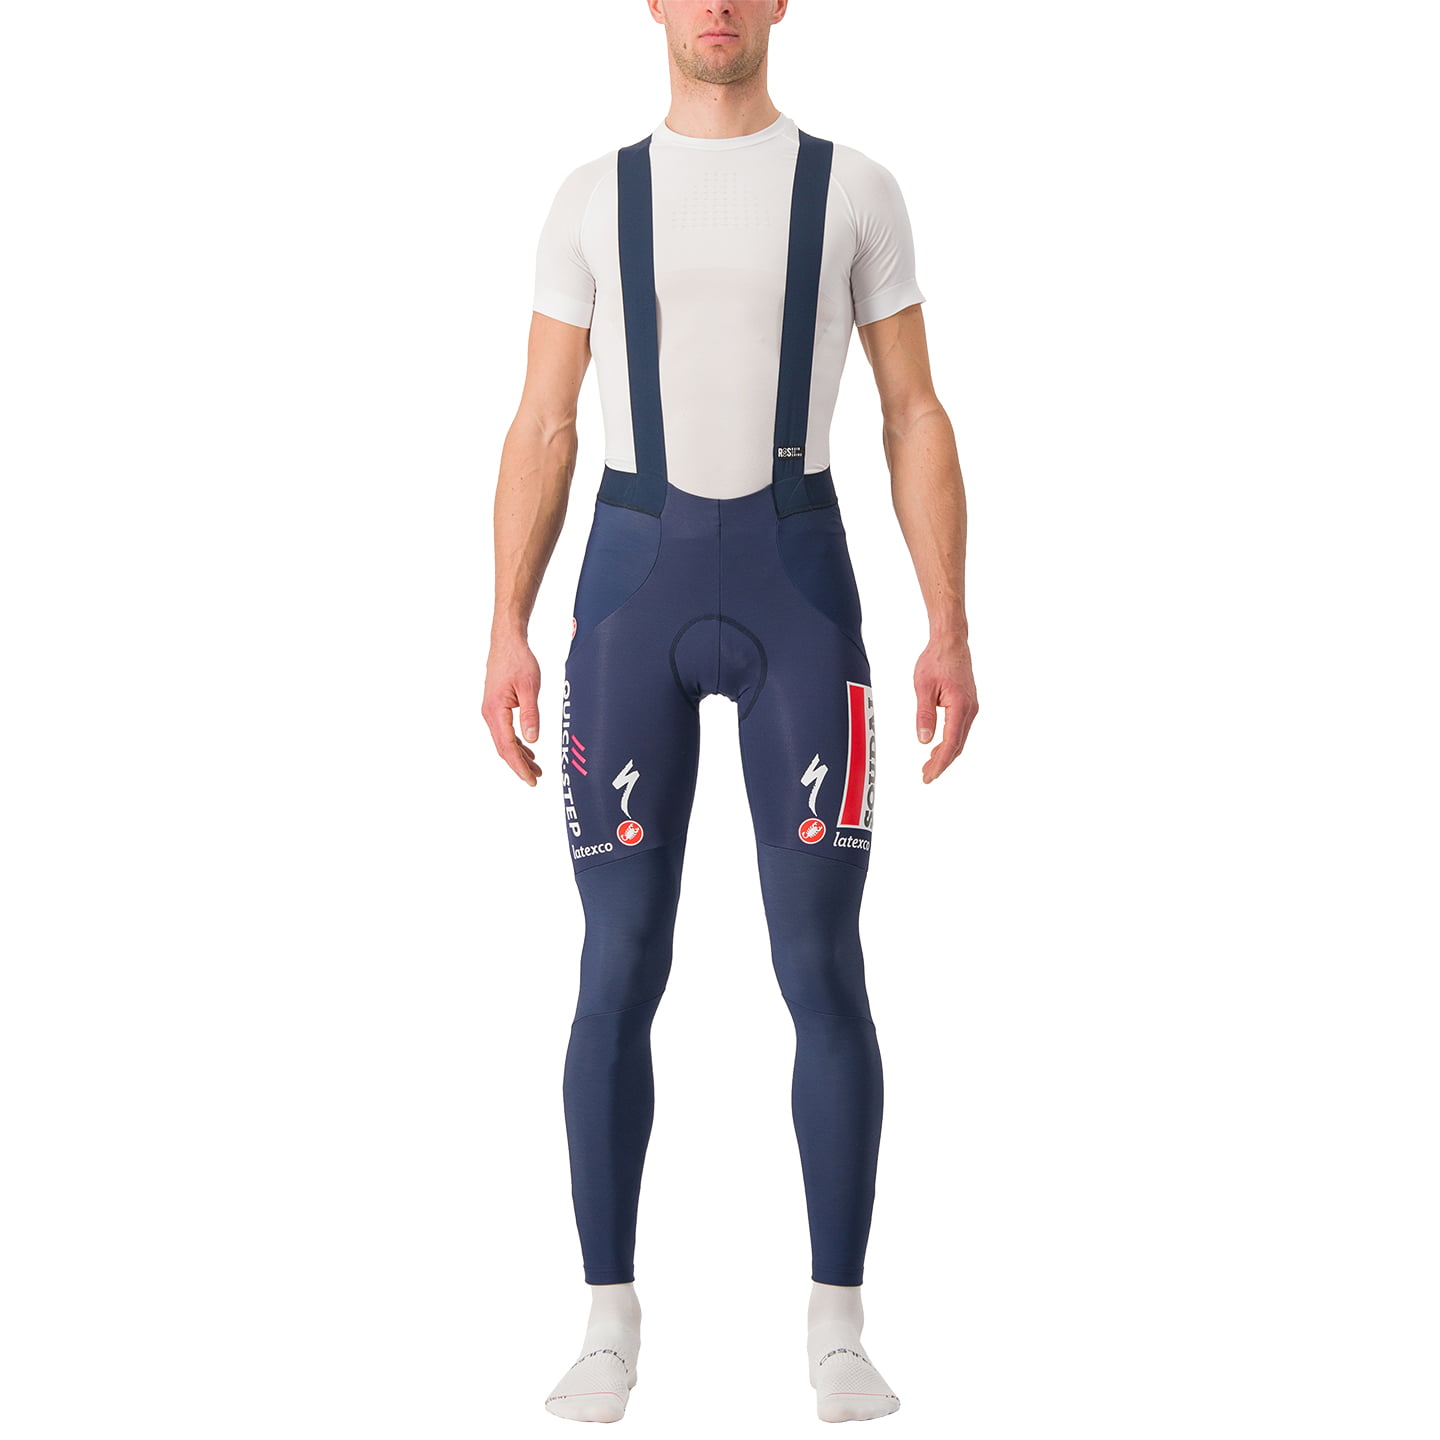 SOUDAL QUICK-STEP 2023 Bib Tights, for men, size L, Cycle tights, Cycling clothing